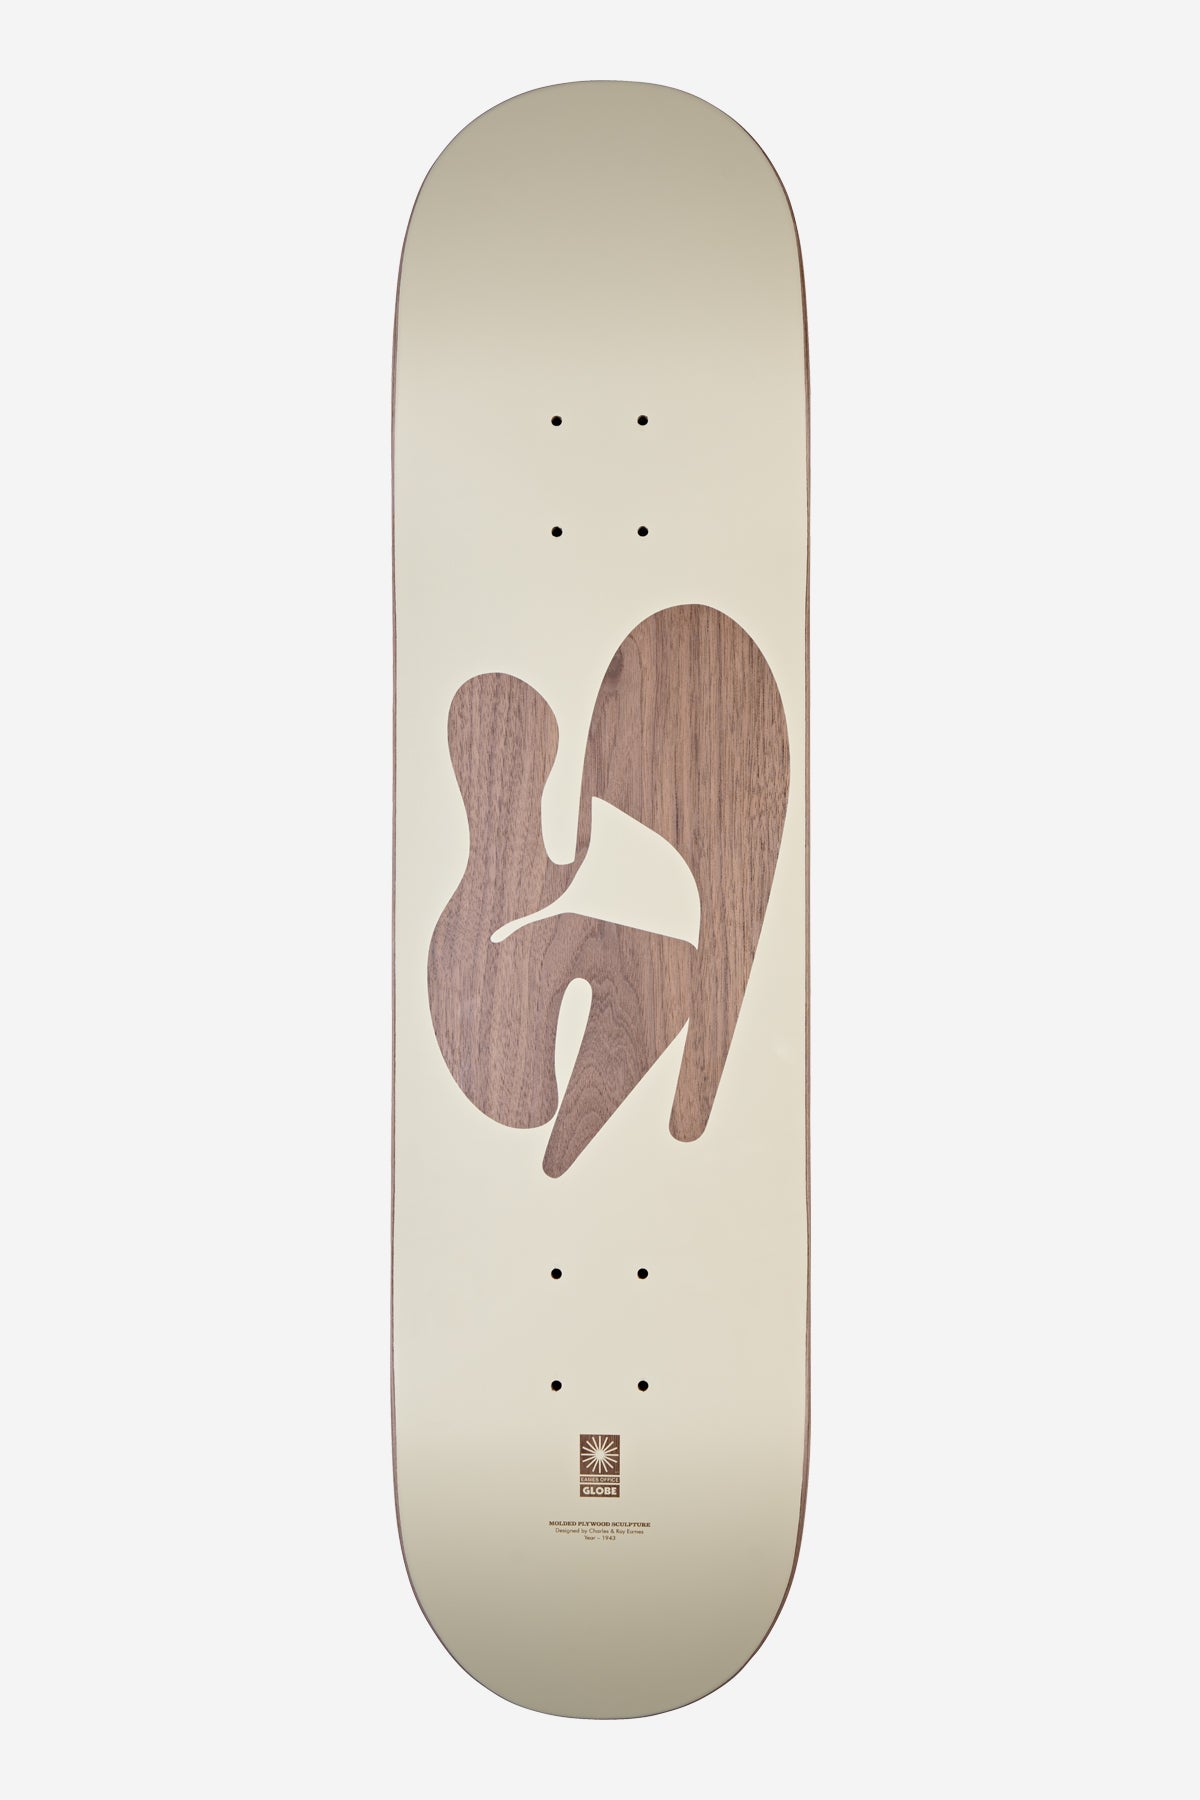 Eames Silhouette Deck (Plywood Sculpture)